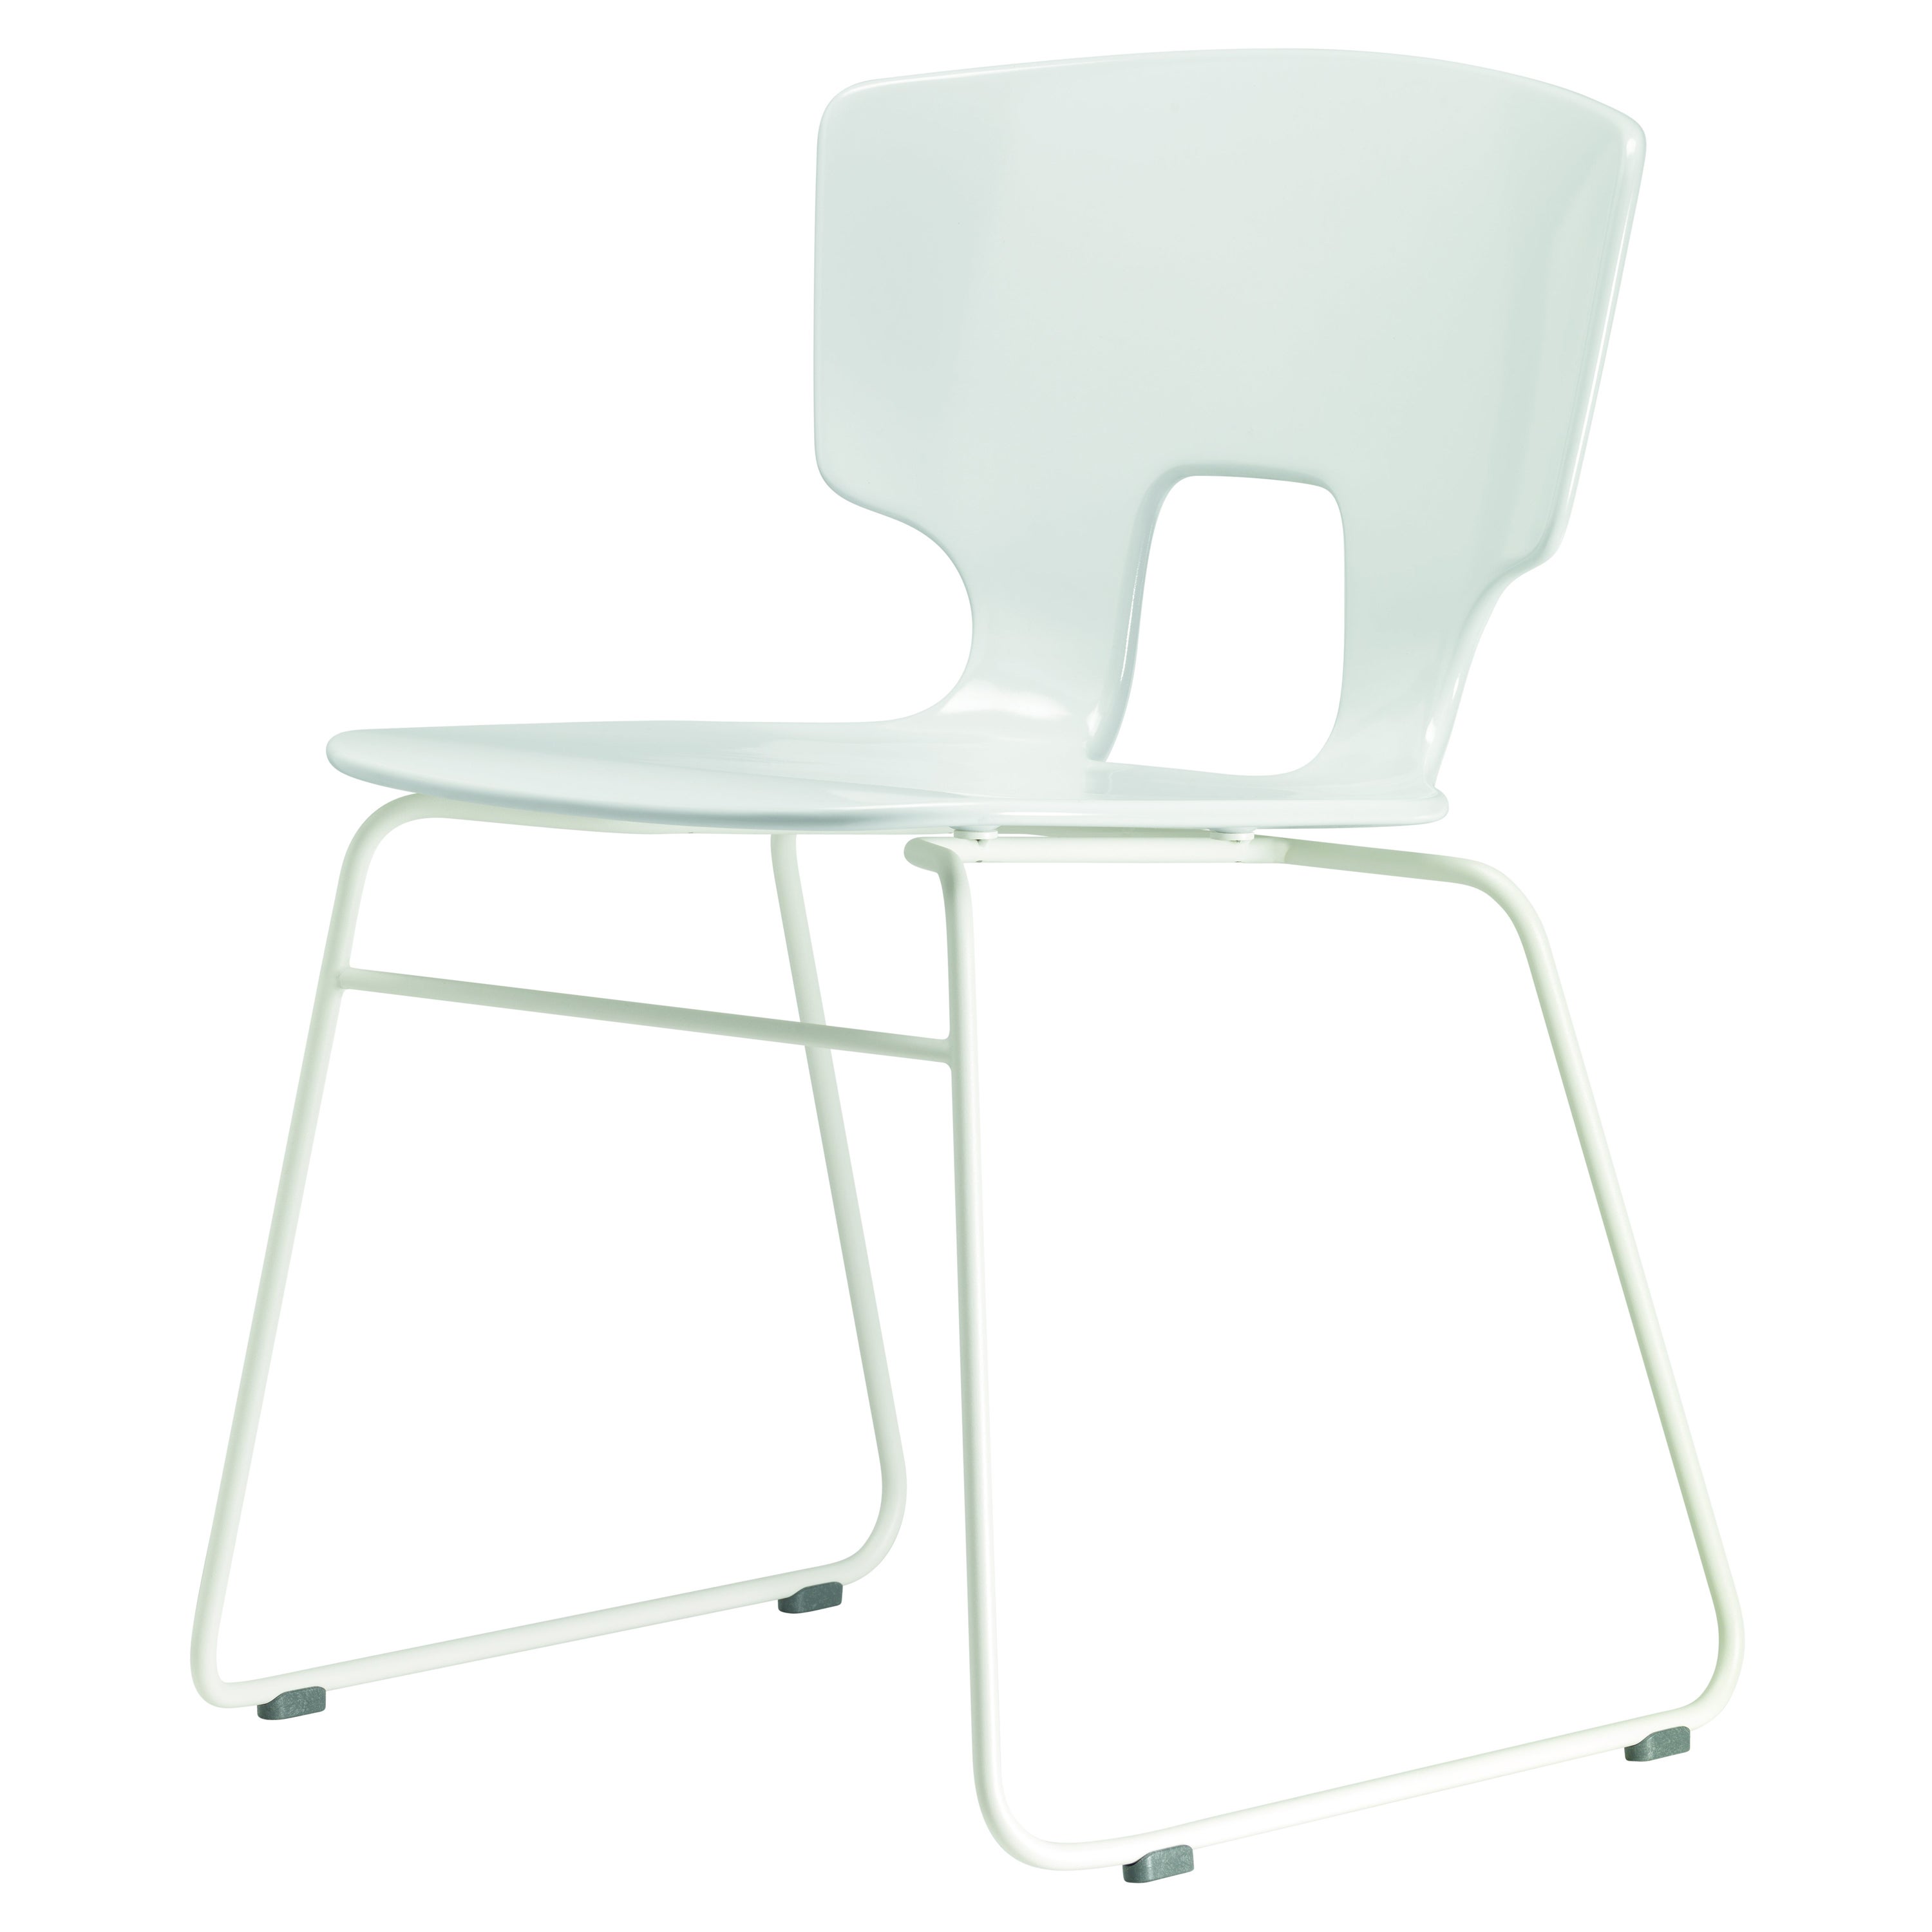 Alias 50B Erice Sledge Chair in White Lacquered Steel Frame by Alfredo Häberli For Sale